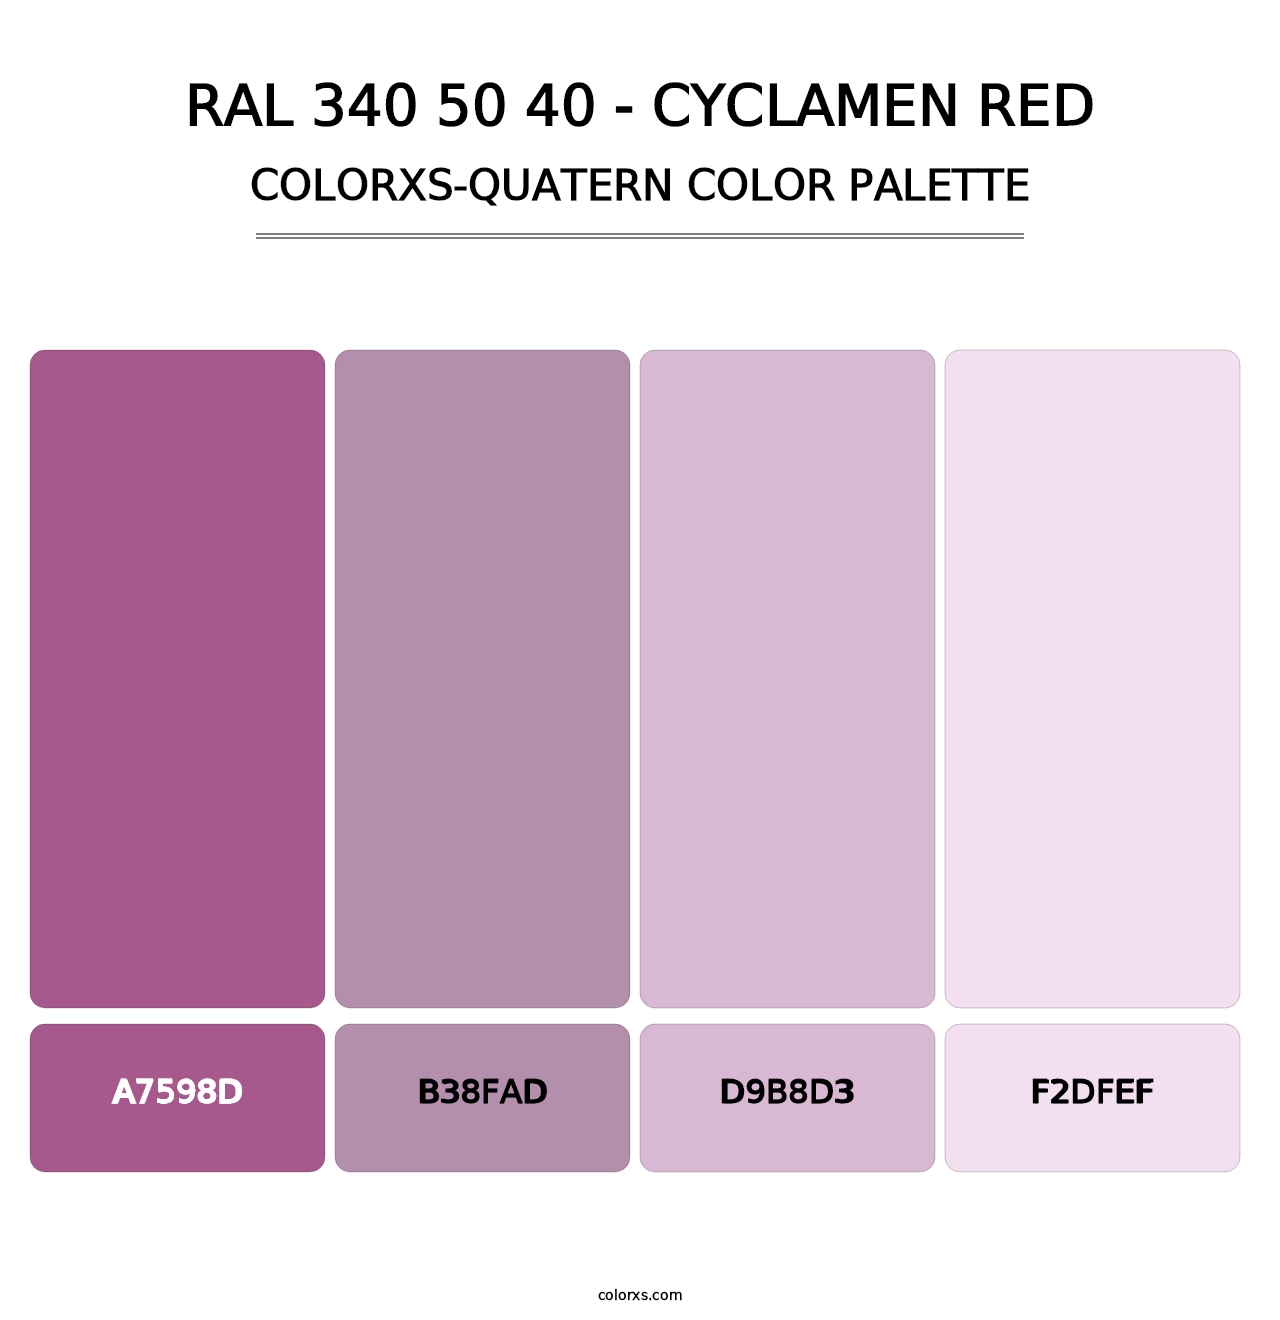 RAL 340 50 40 - Cyclamen Red - Colorxs Quatern Palette